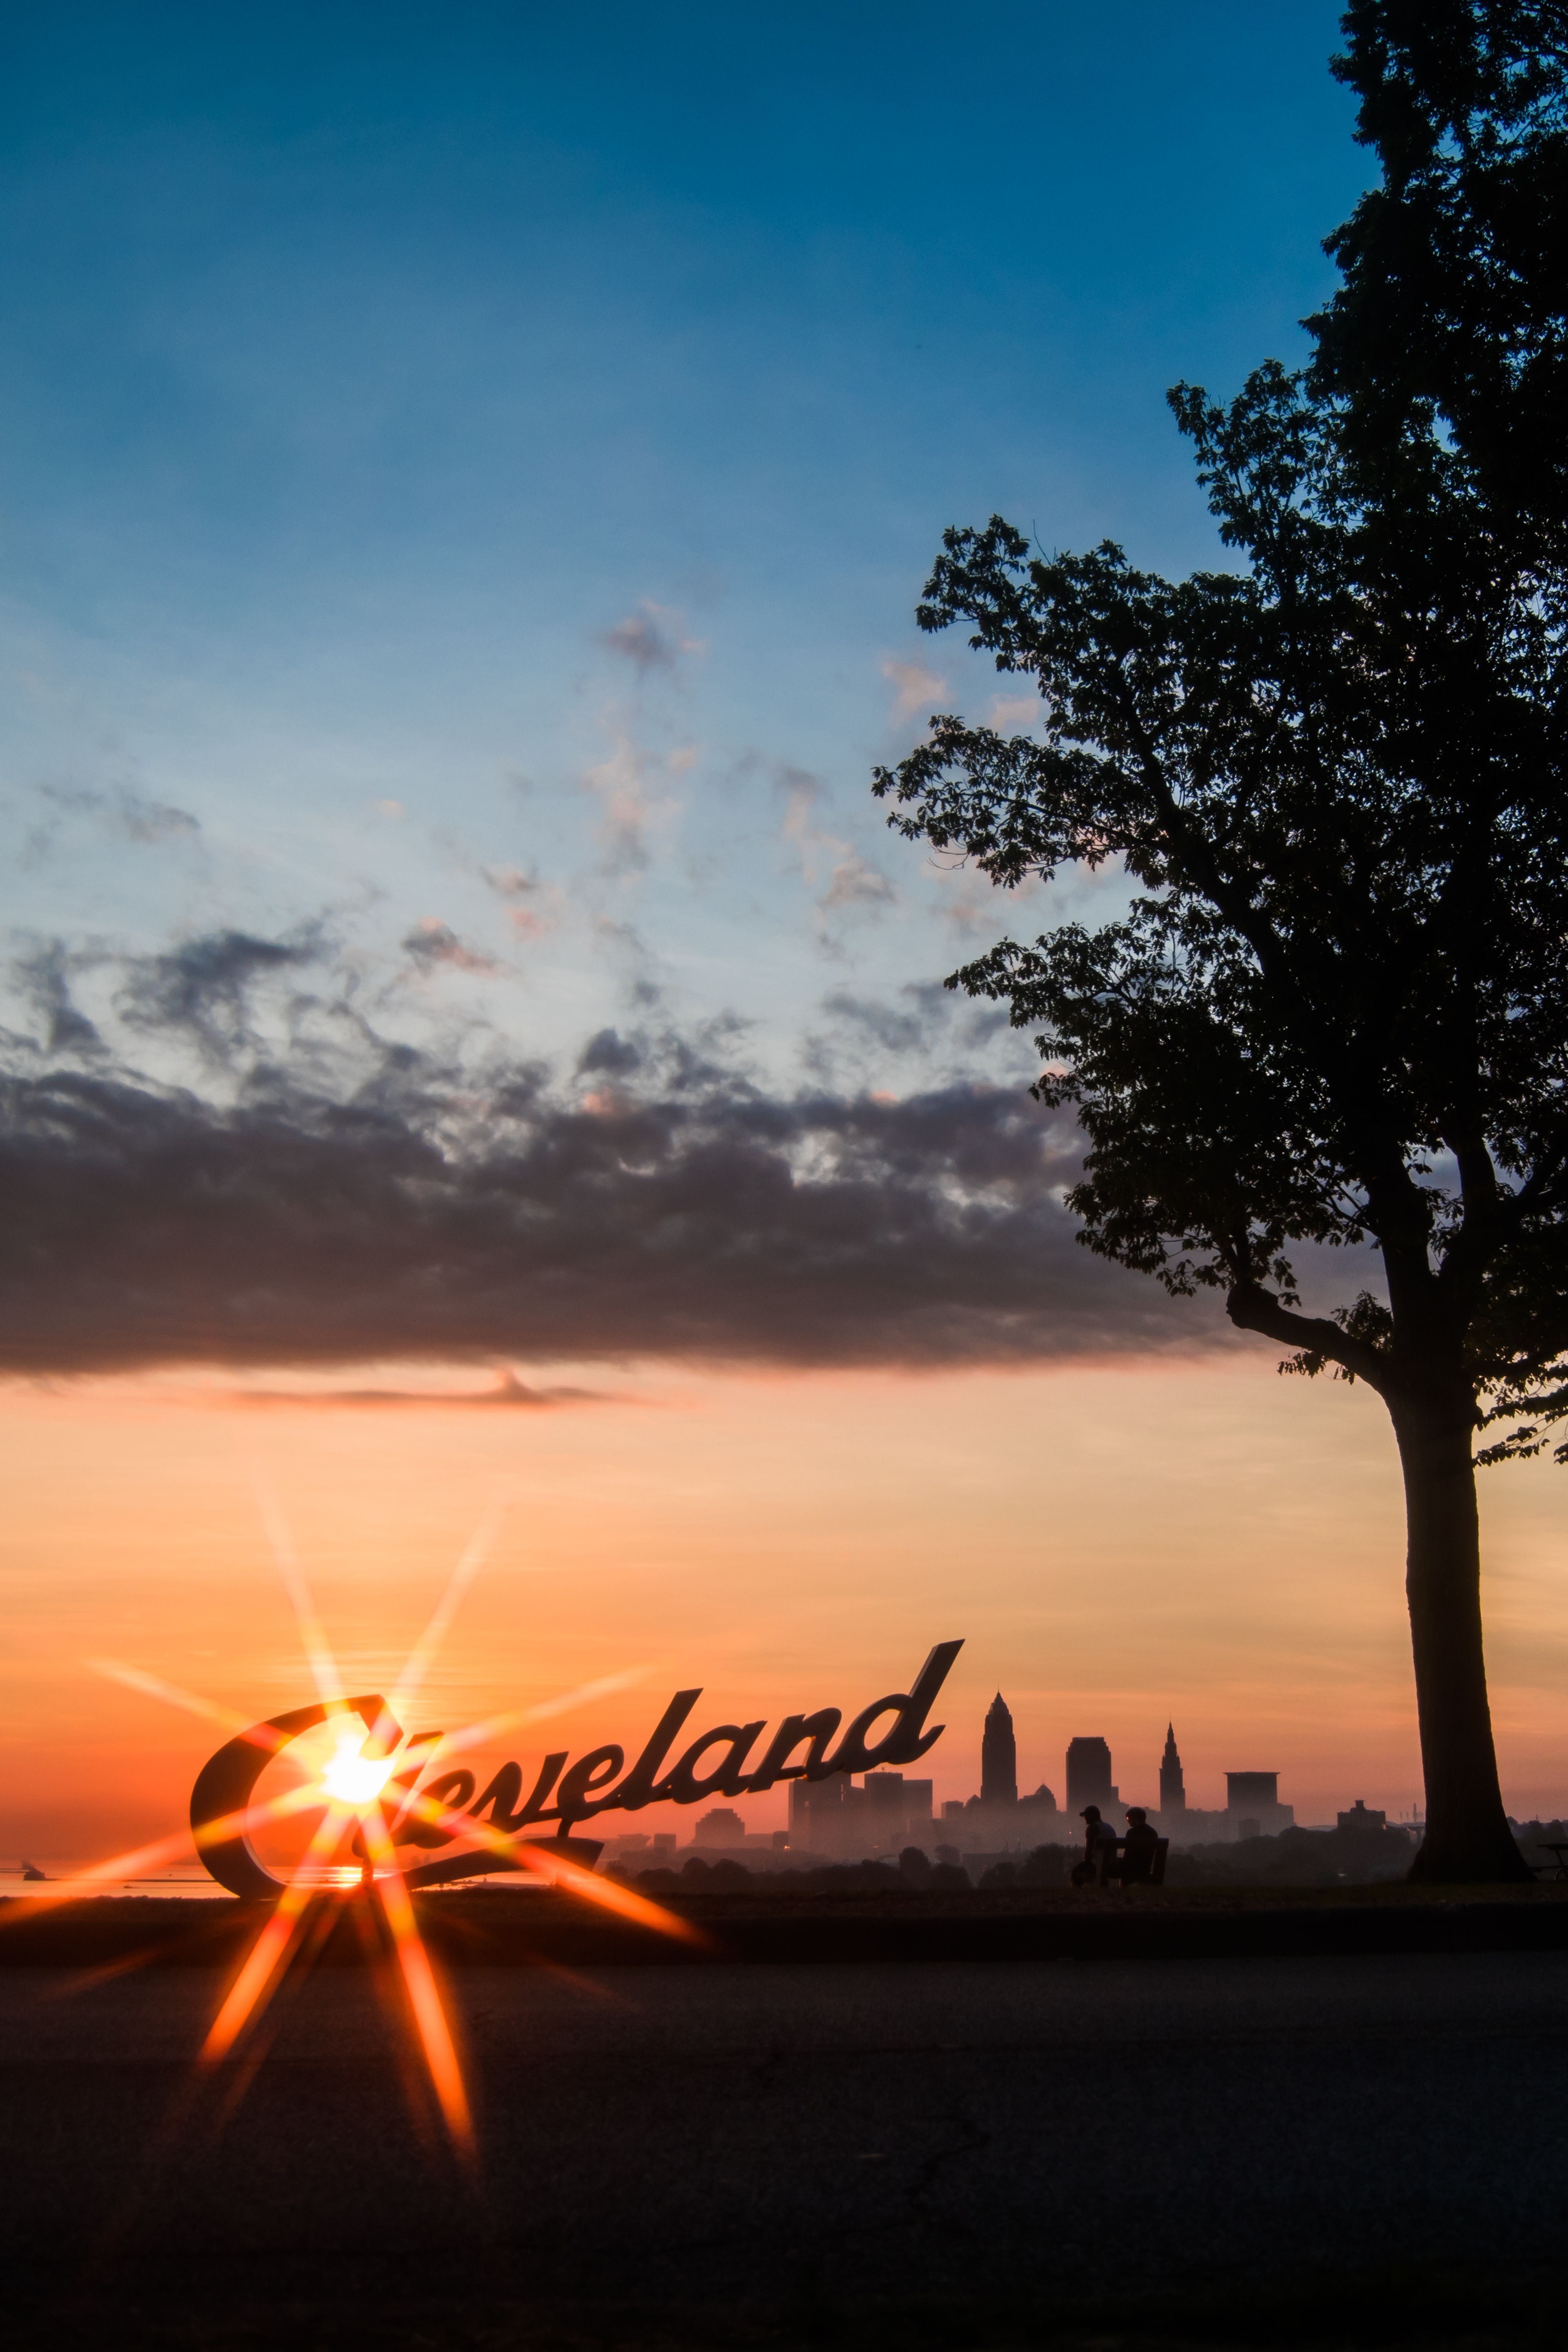 cities, sunset, silhouettes, night city, inscription, sunlight, cleveland iphone wallpaper